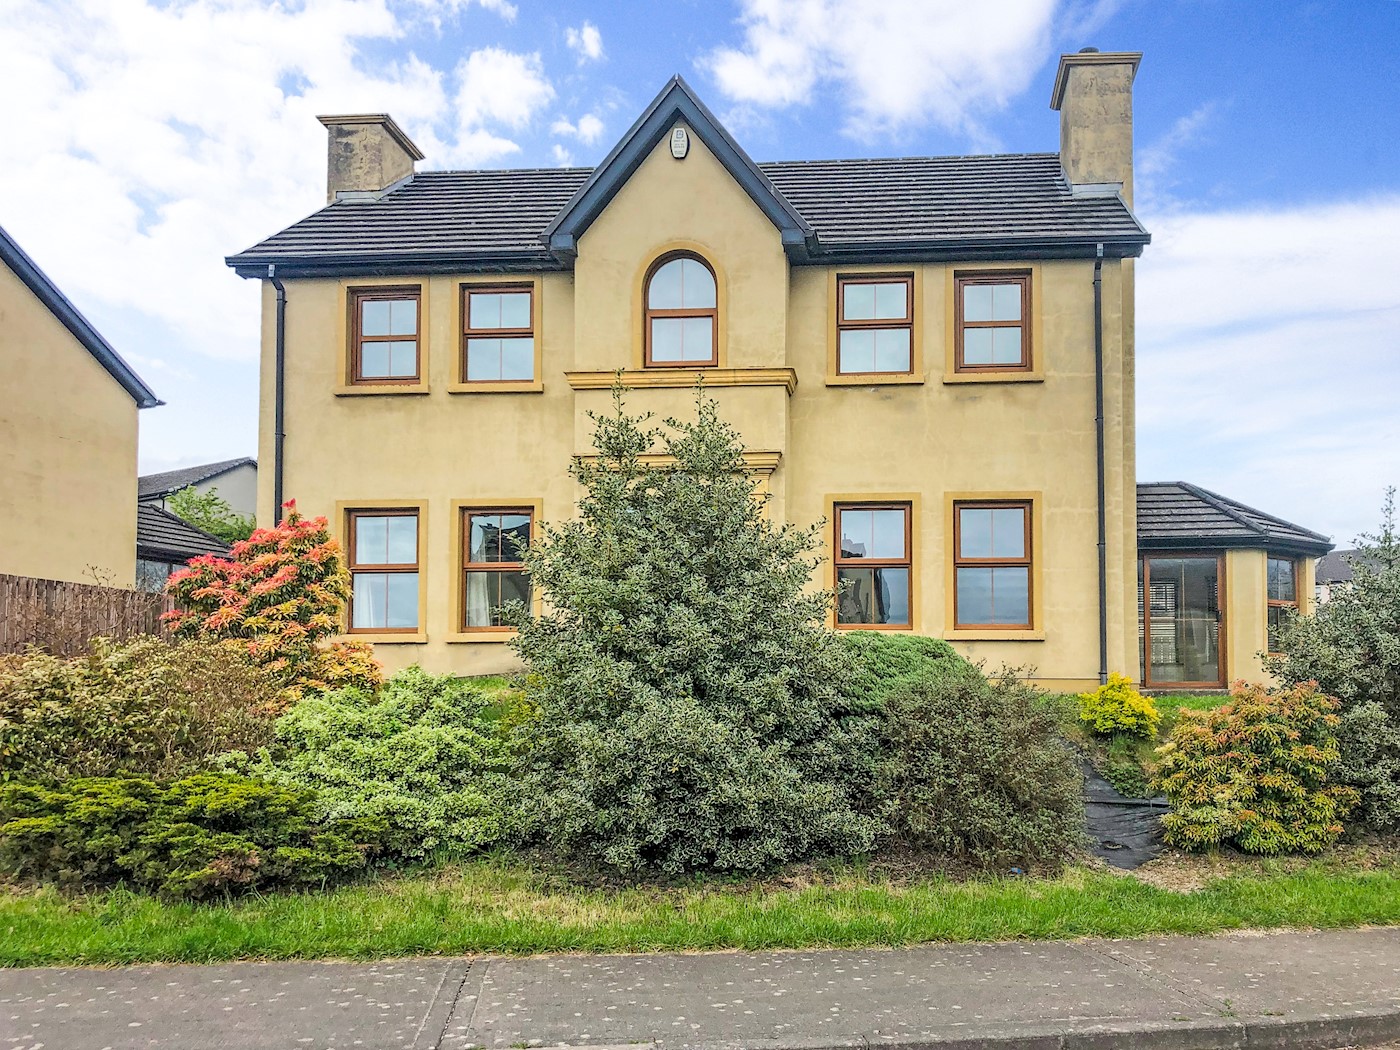 1 Churchlands, Manorcunningham, Co. Donegal, F92 PD85 1/12